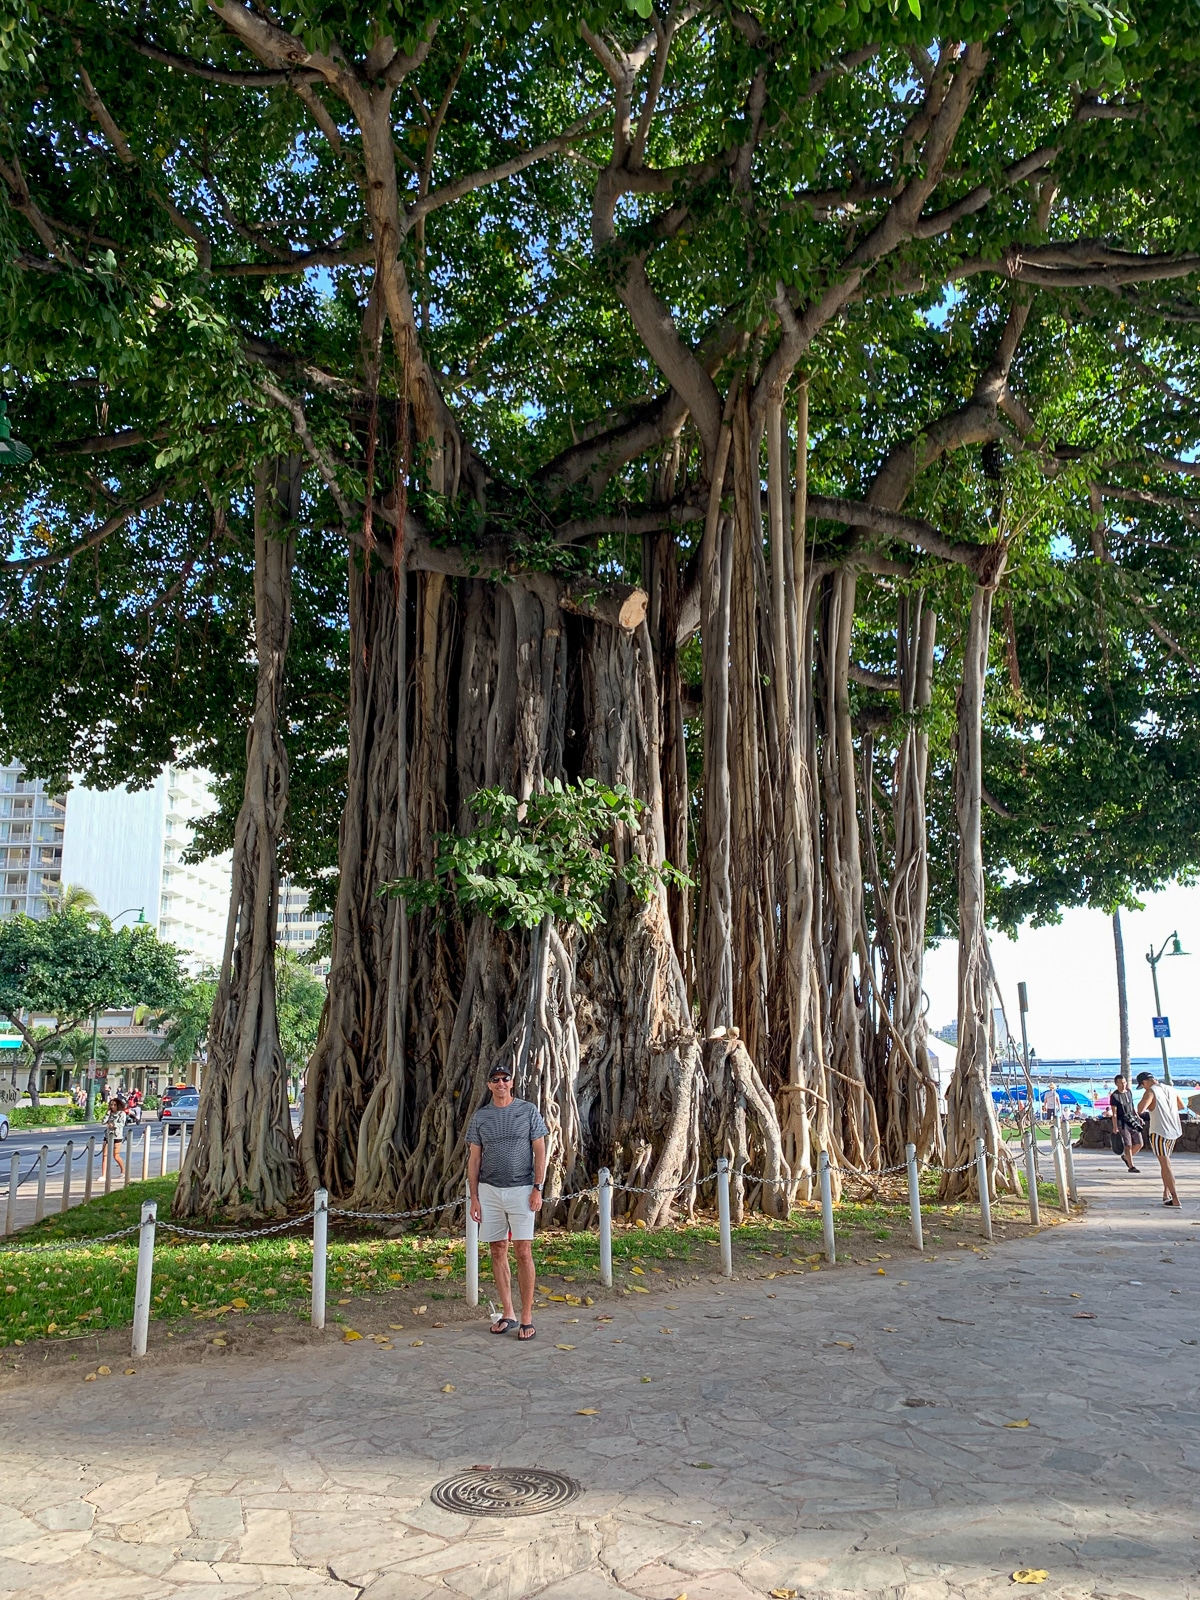 Mike standing by a large banyan tree.